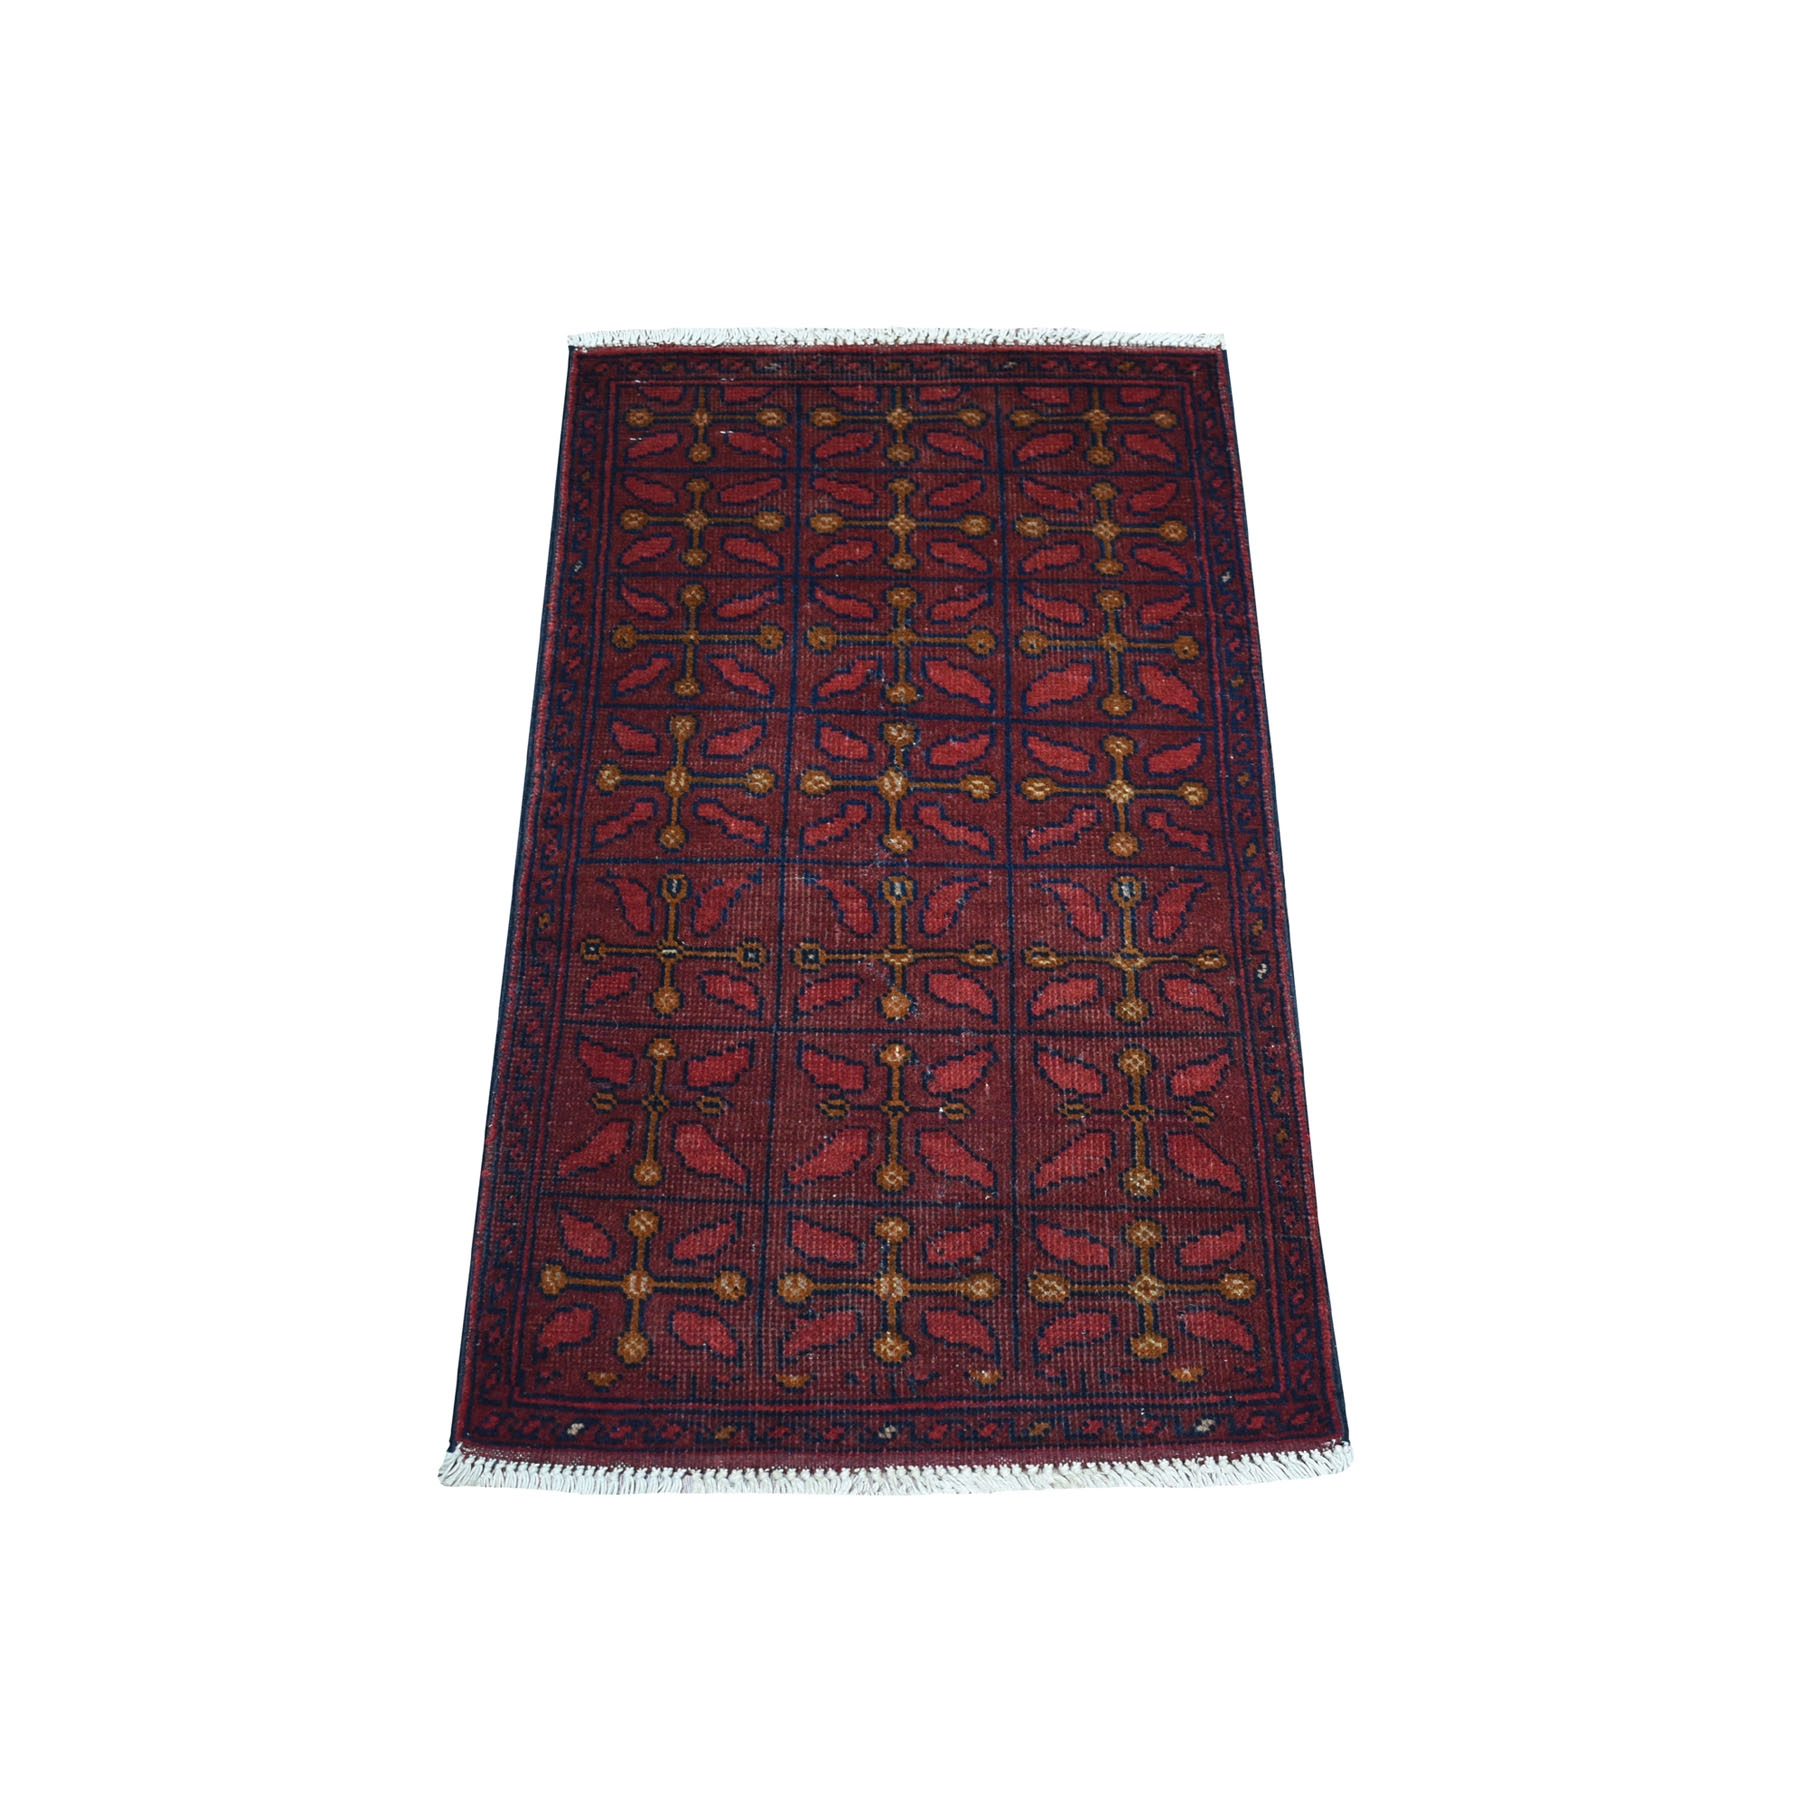 1'7"X3'2" Deep And Saturated Red Tribal Afghan Andkhoy Pure Wool Hand Knotted Oriental Rug moaec7d9